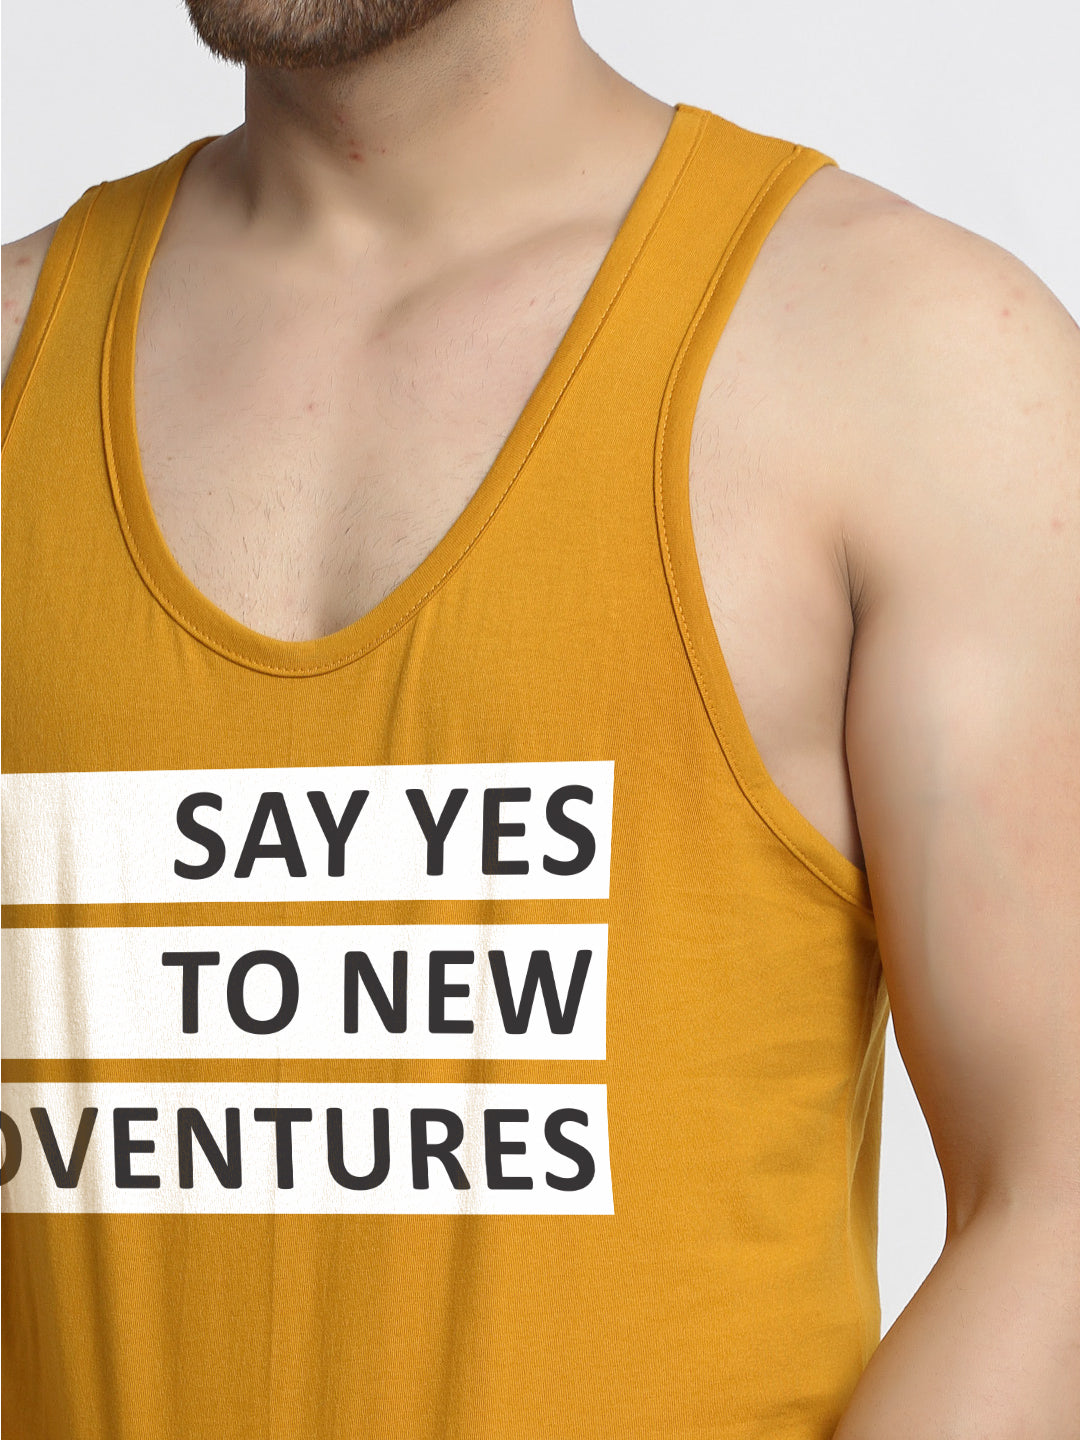 Say Yes To New Adventure Printed Innerwear Gym Vest - Friskers